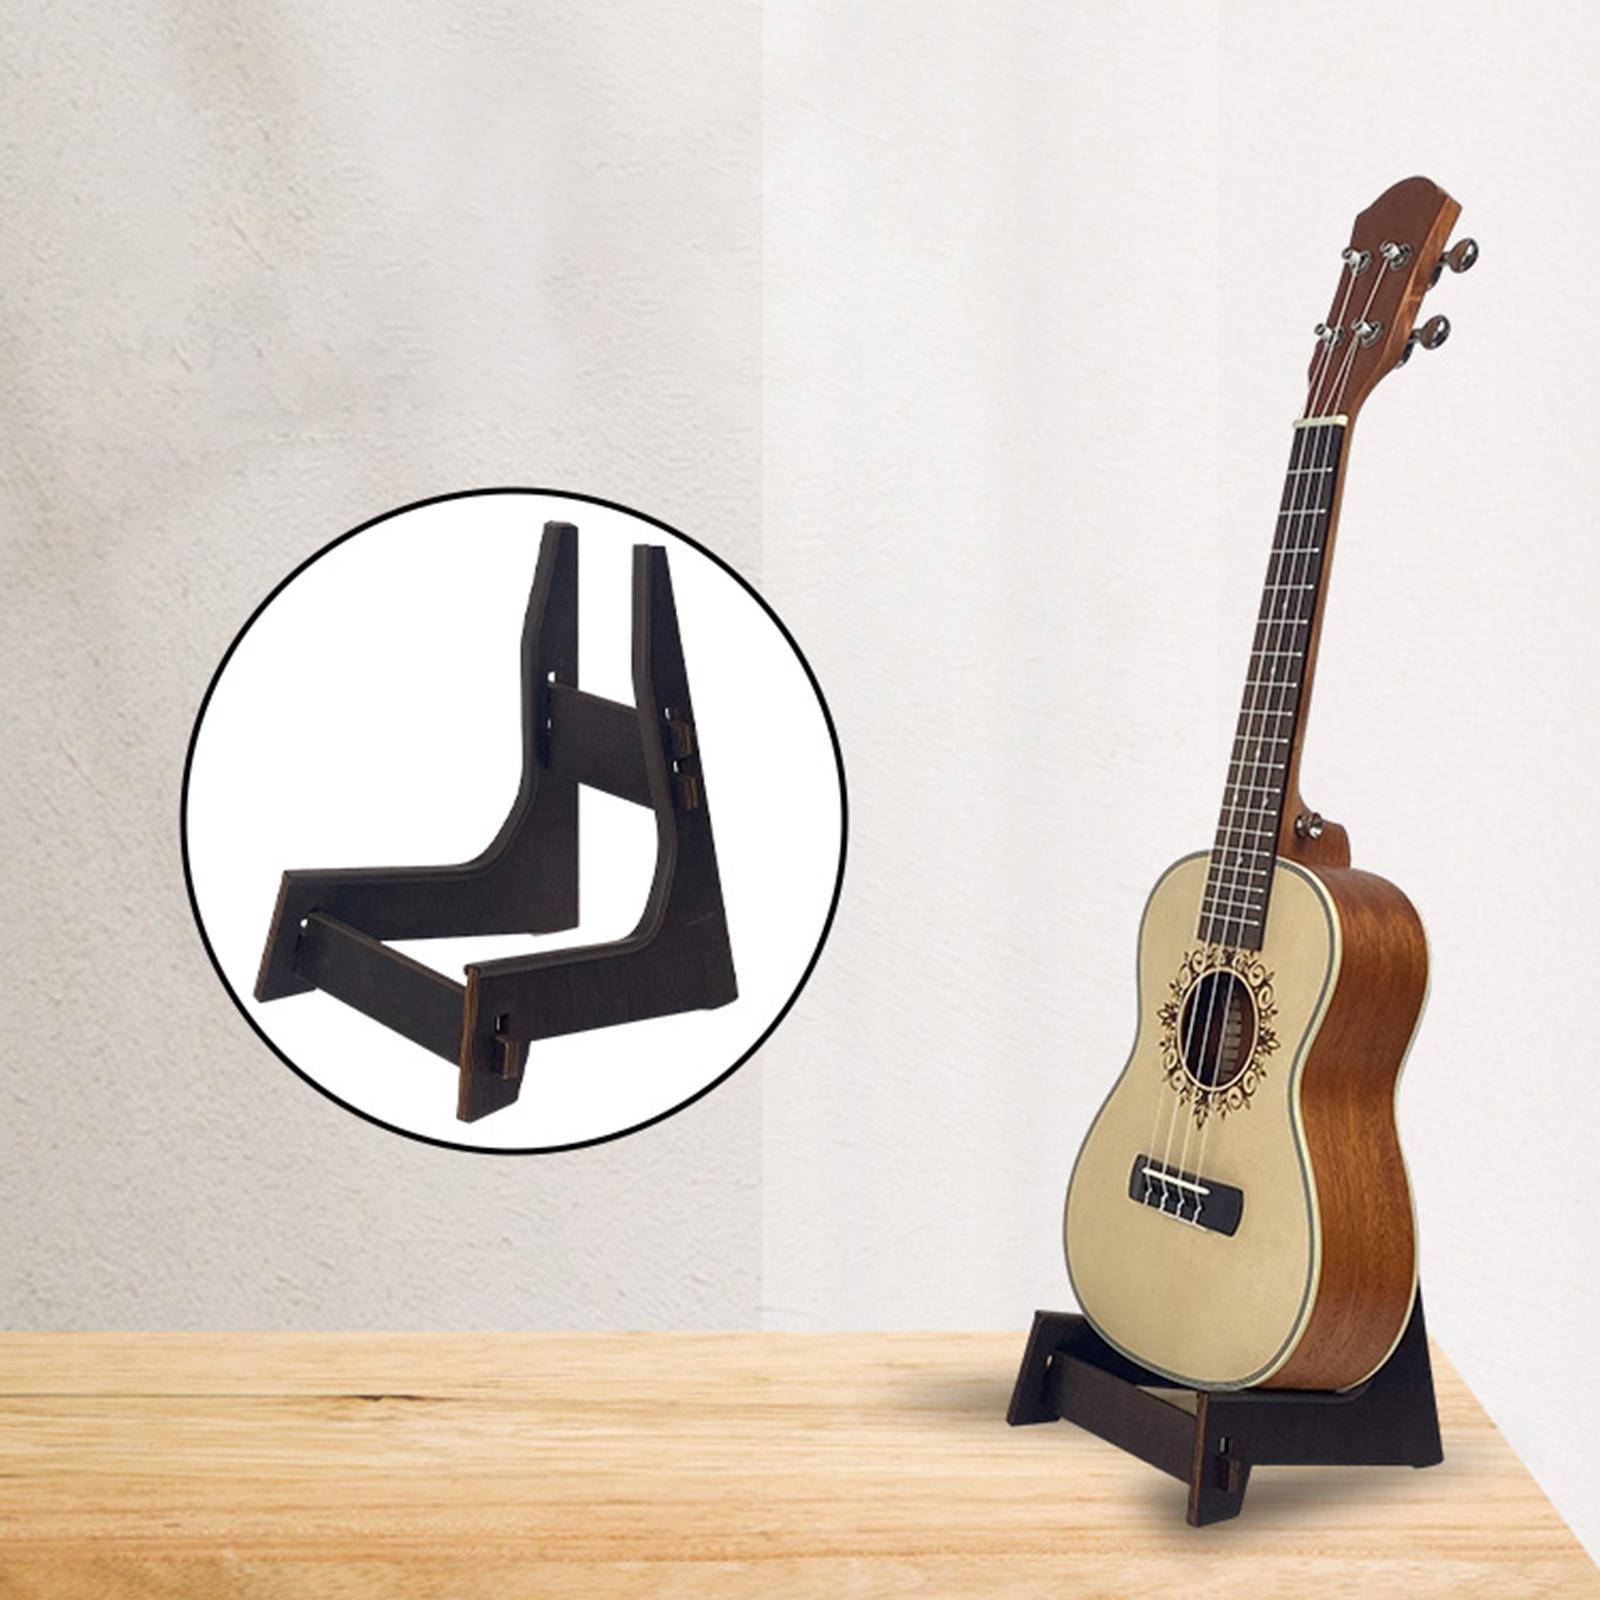 Wood Electric Guitar Floor Stand Ukulele Storage Rack Non Slip Guitar Support Stand for Ukulele Mandolin Bass Guitar Players Gifts Accessory